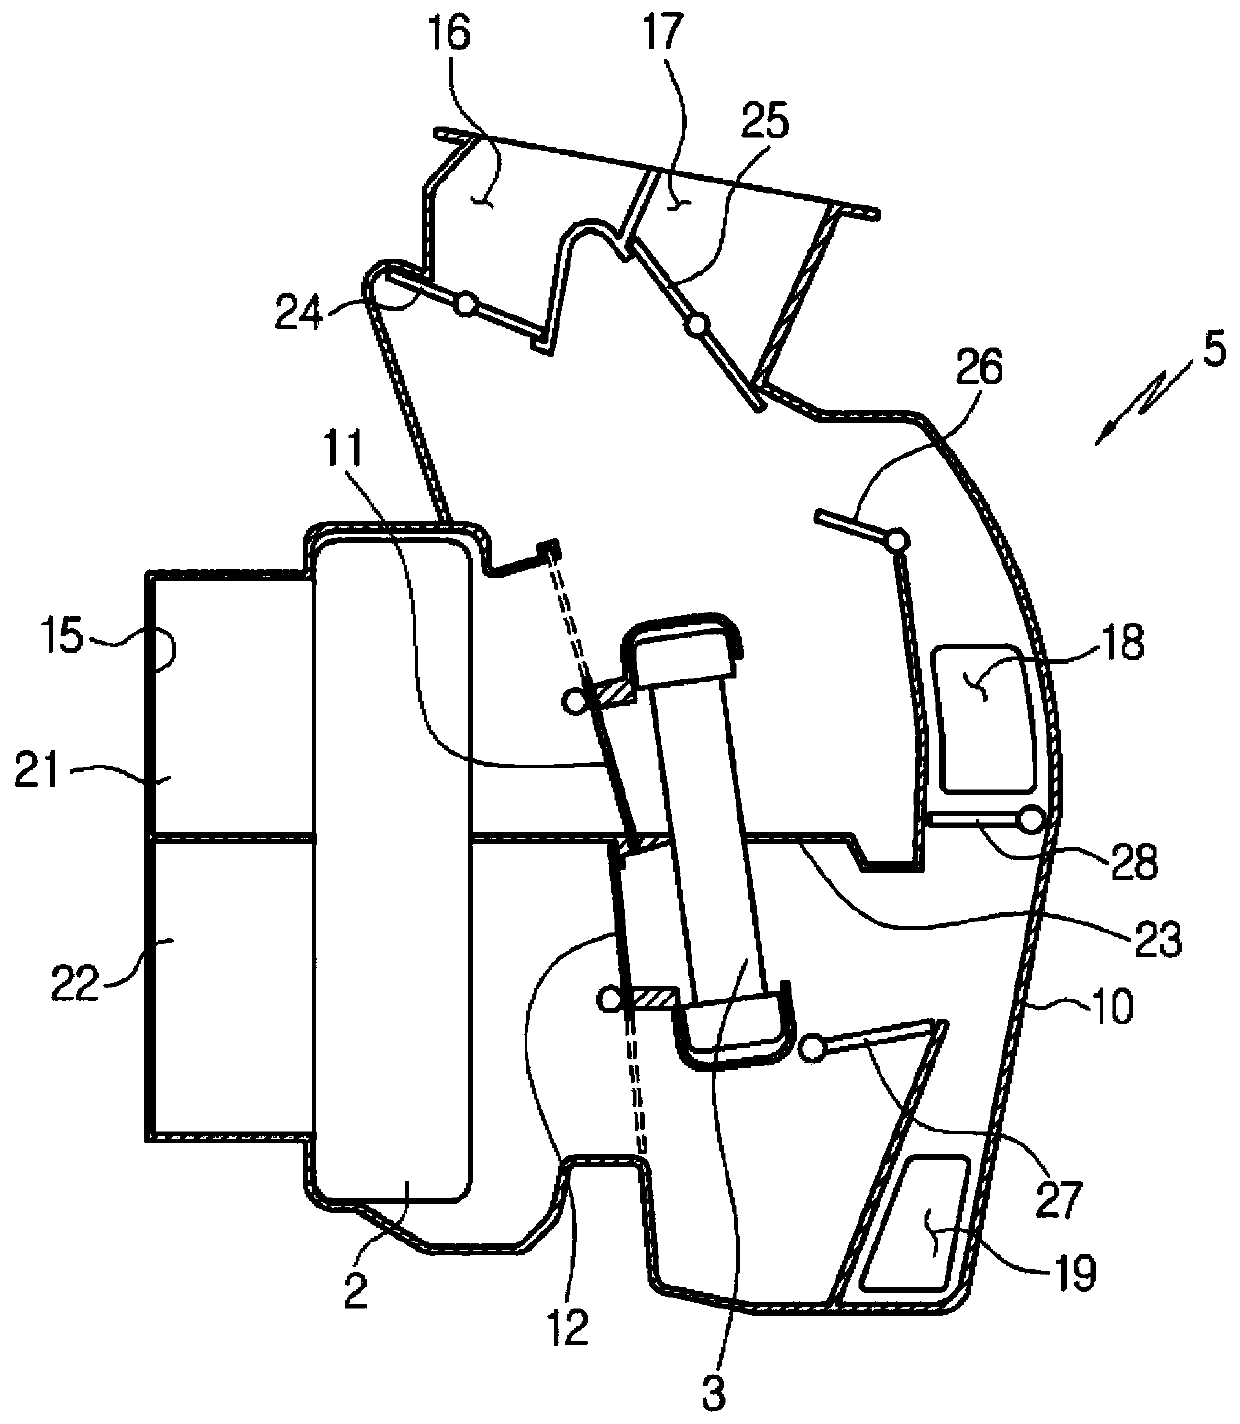 Blower unit of air conditioning device for vehicle